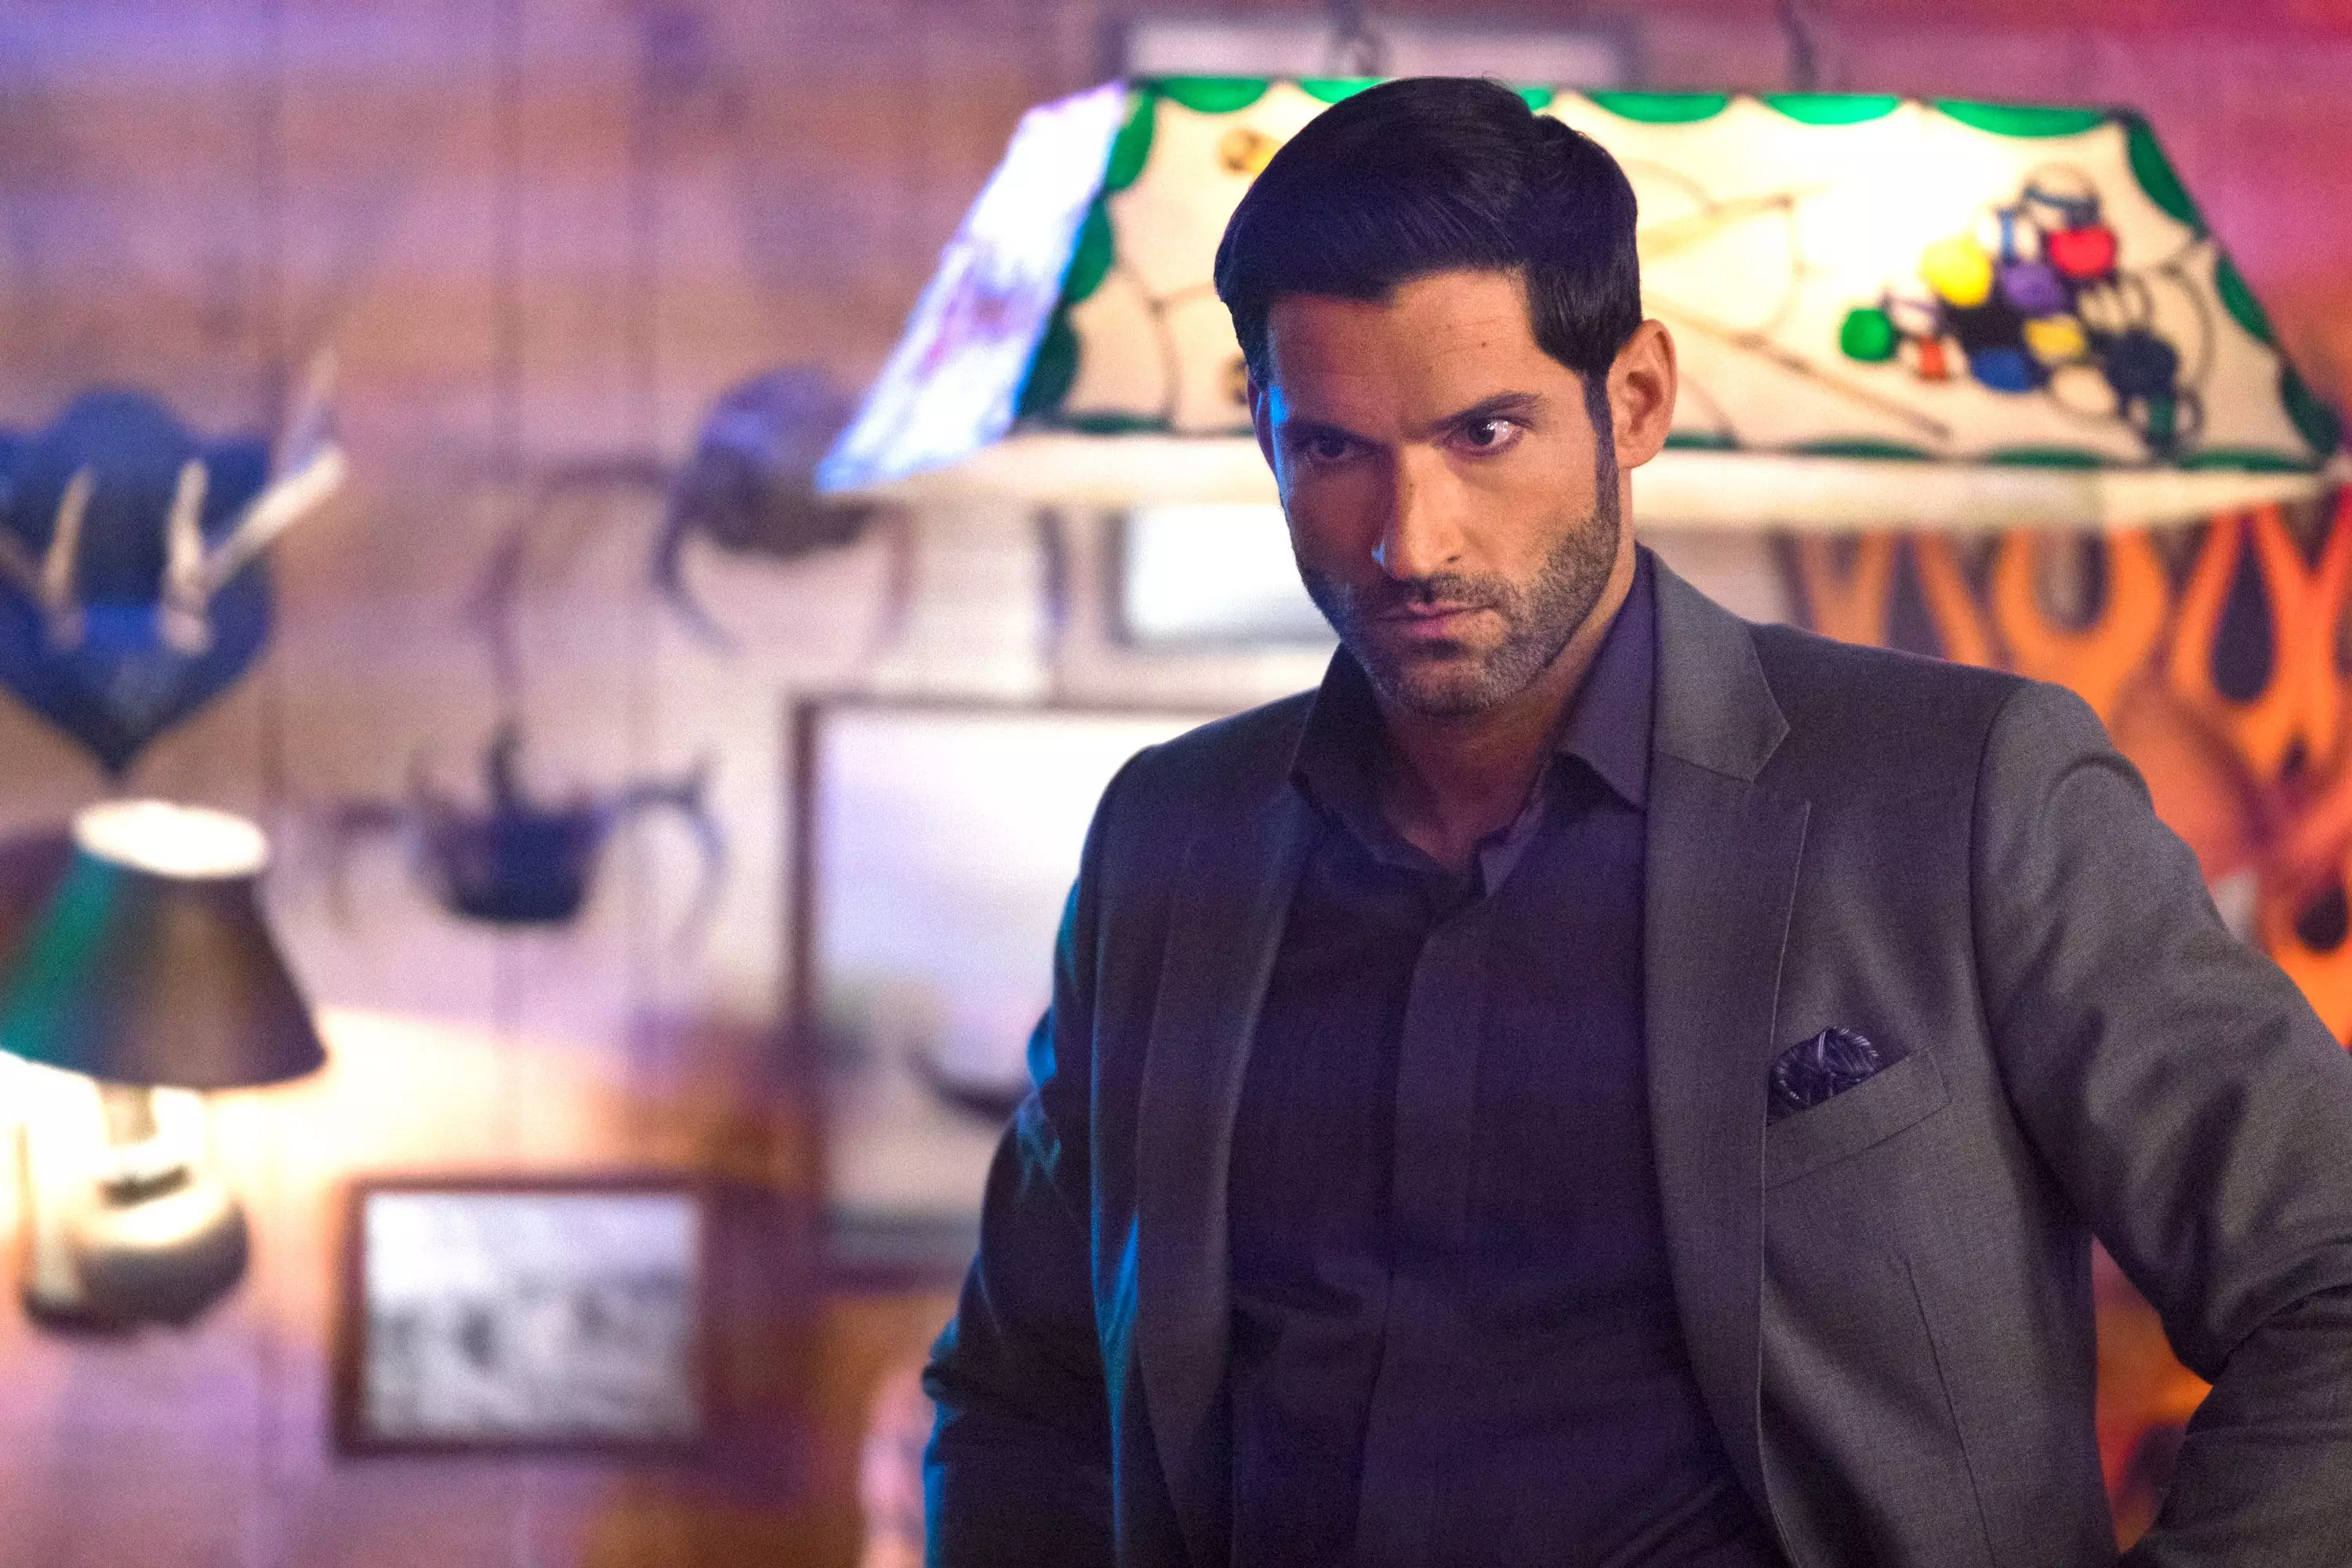 The actor, 41, now plays the title character in 'Lucifer' (